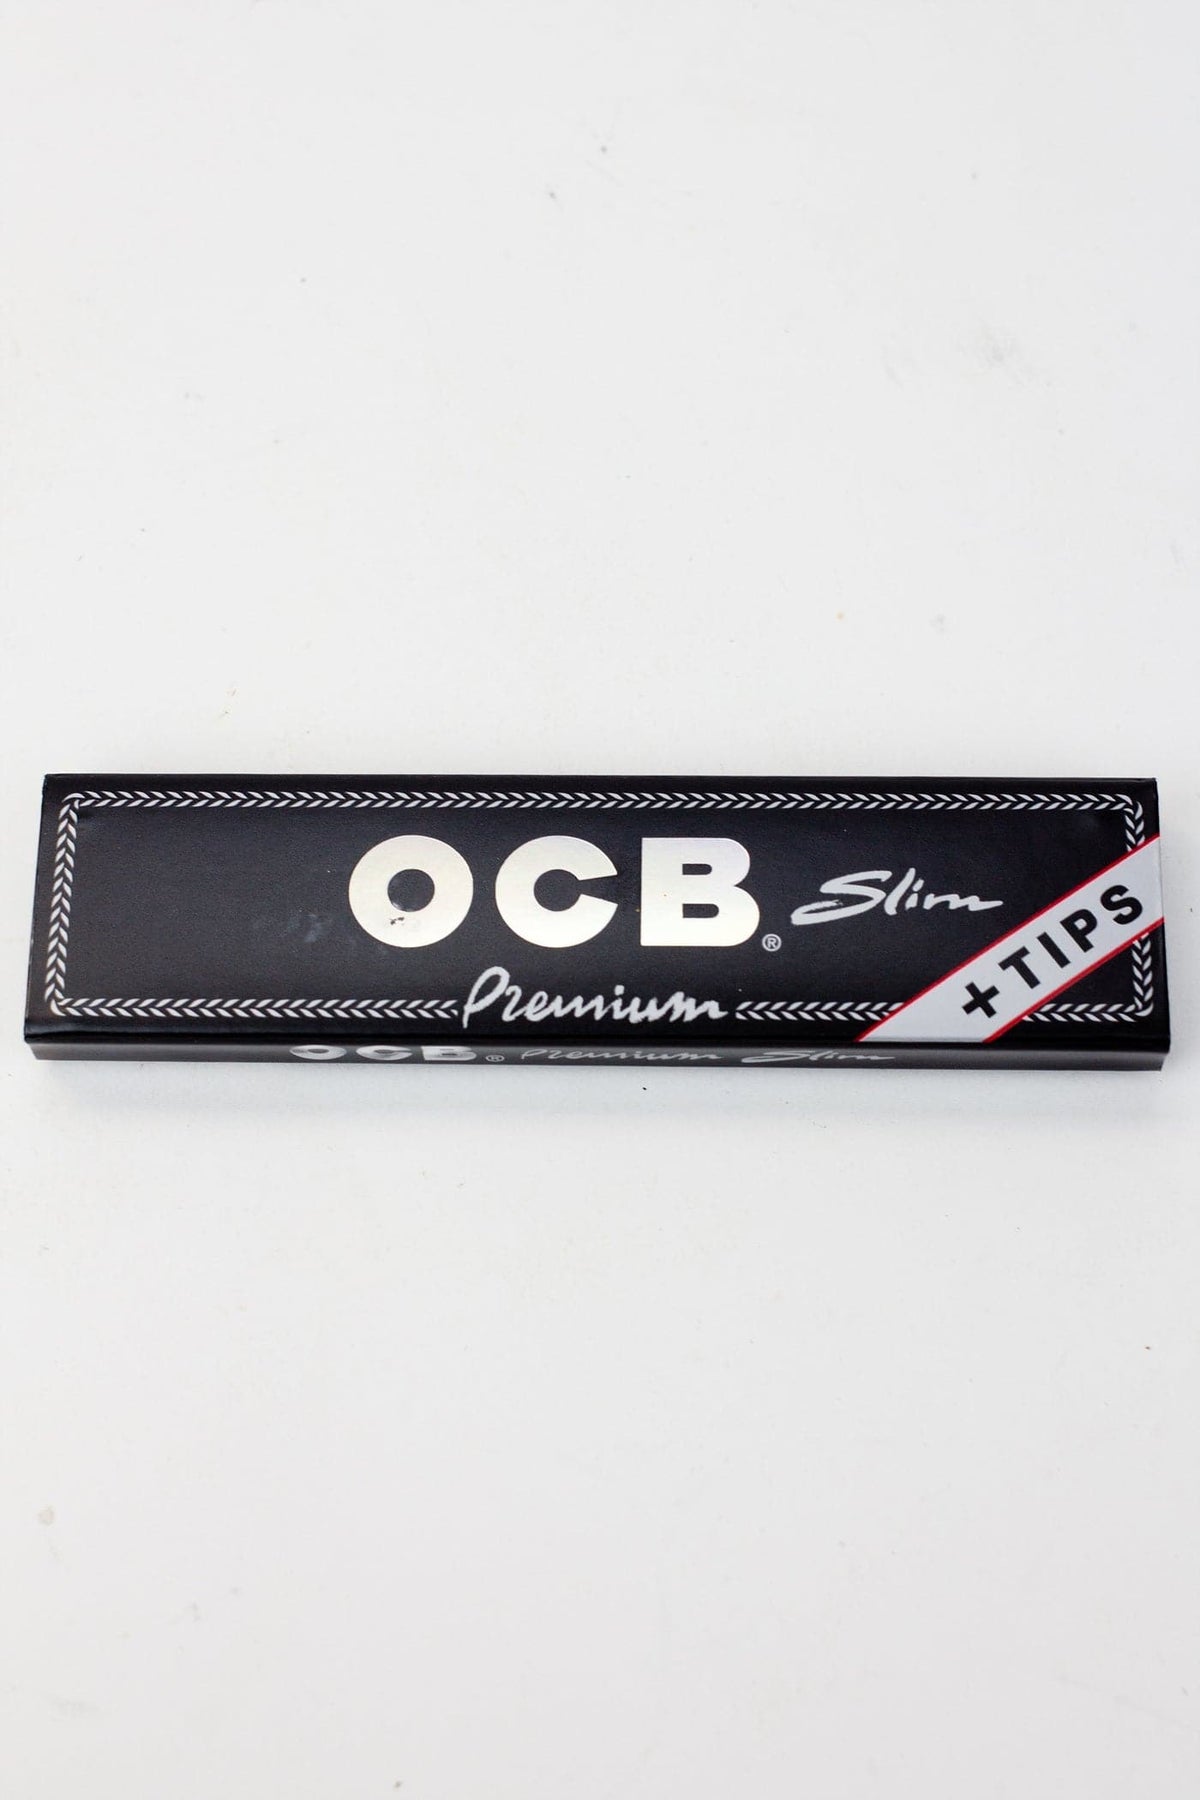 OCB King Slim Premium rolling paper with Tips – Mile High Glass Pipes